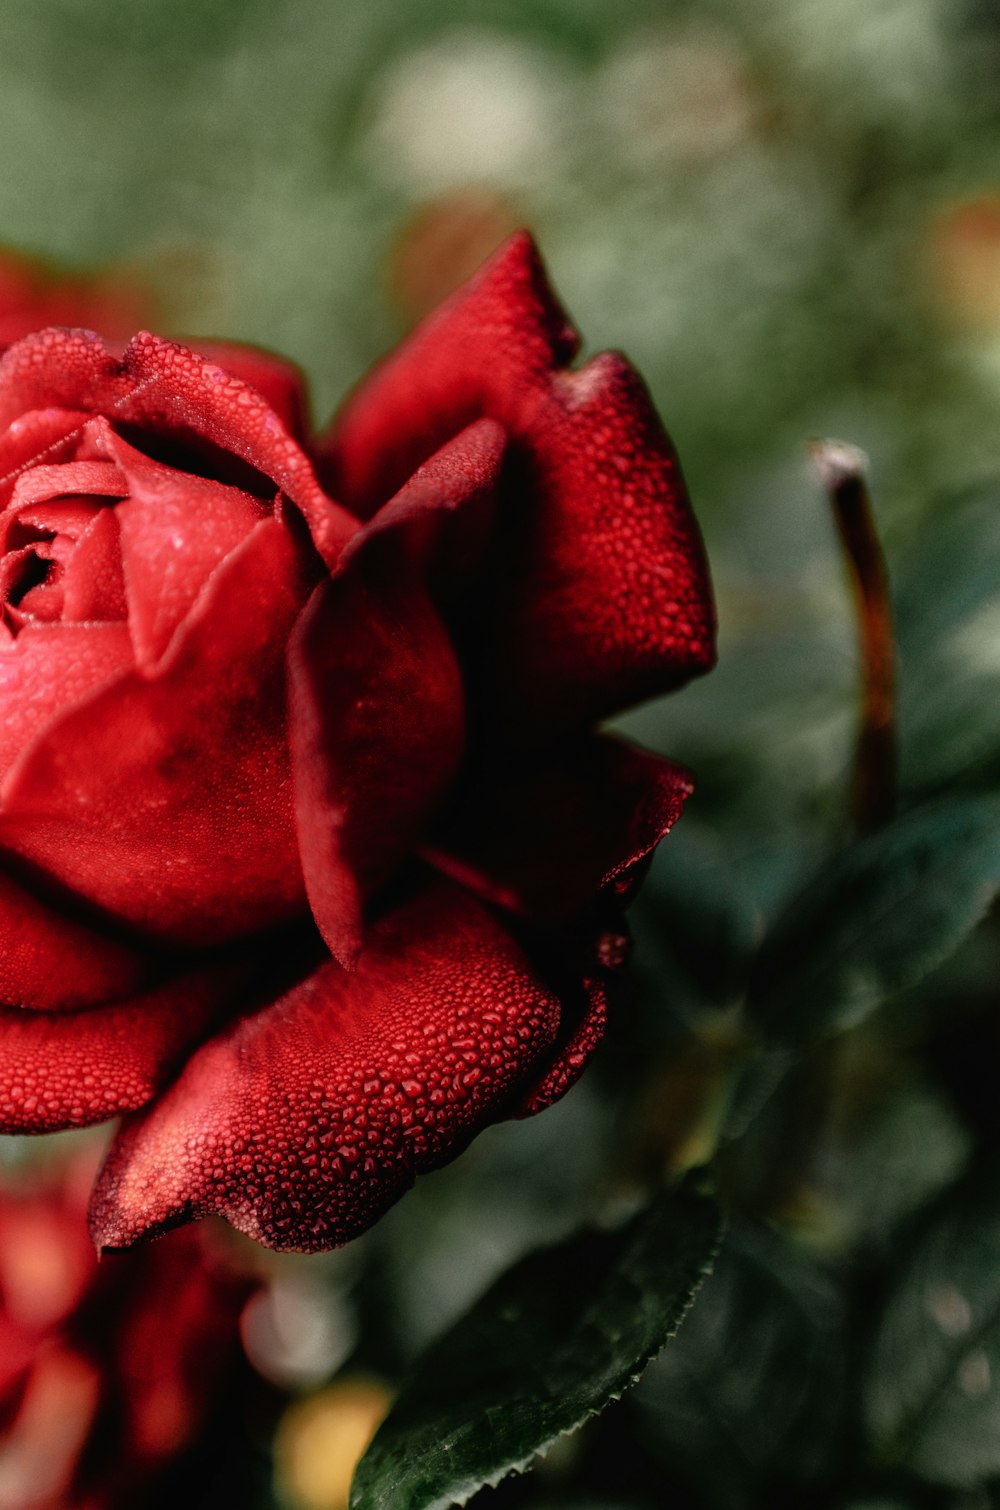 a close up of a red rose